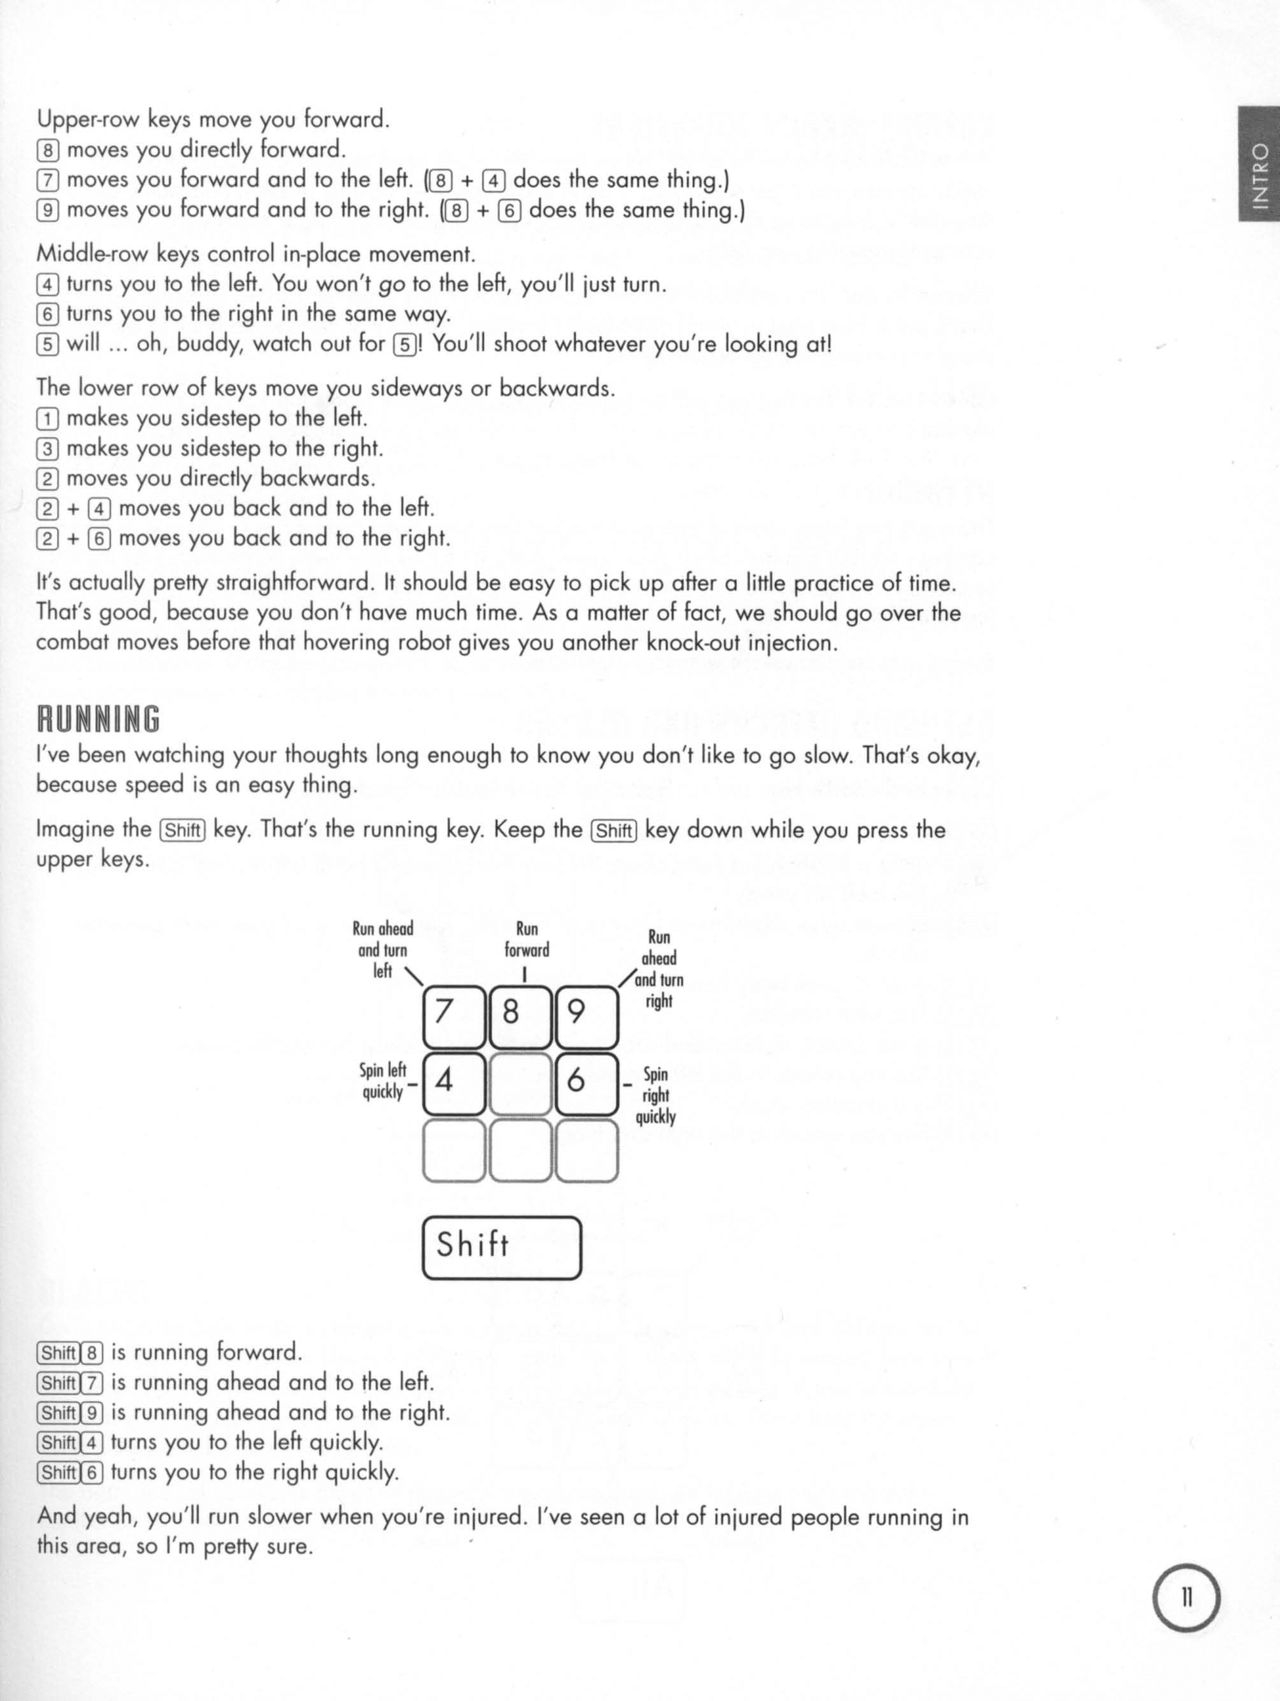 BioForge (PC (DOS/Windows)) Strategy Guide 11